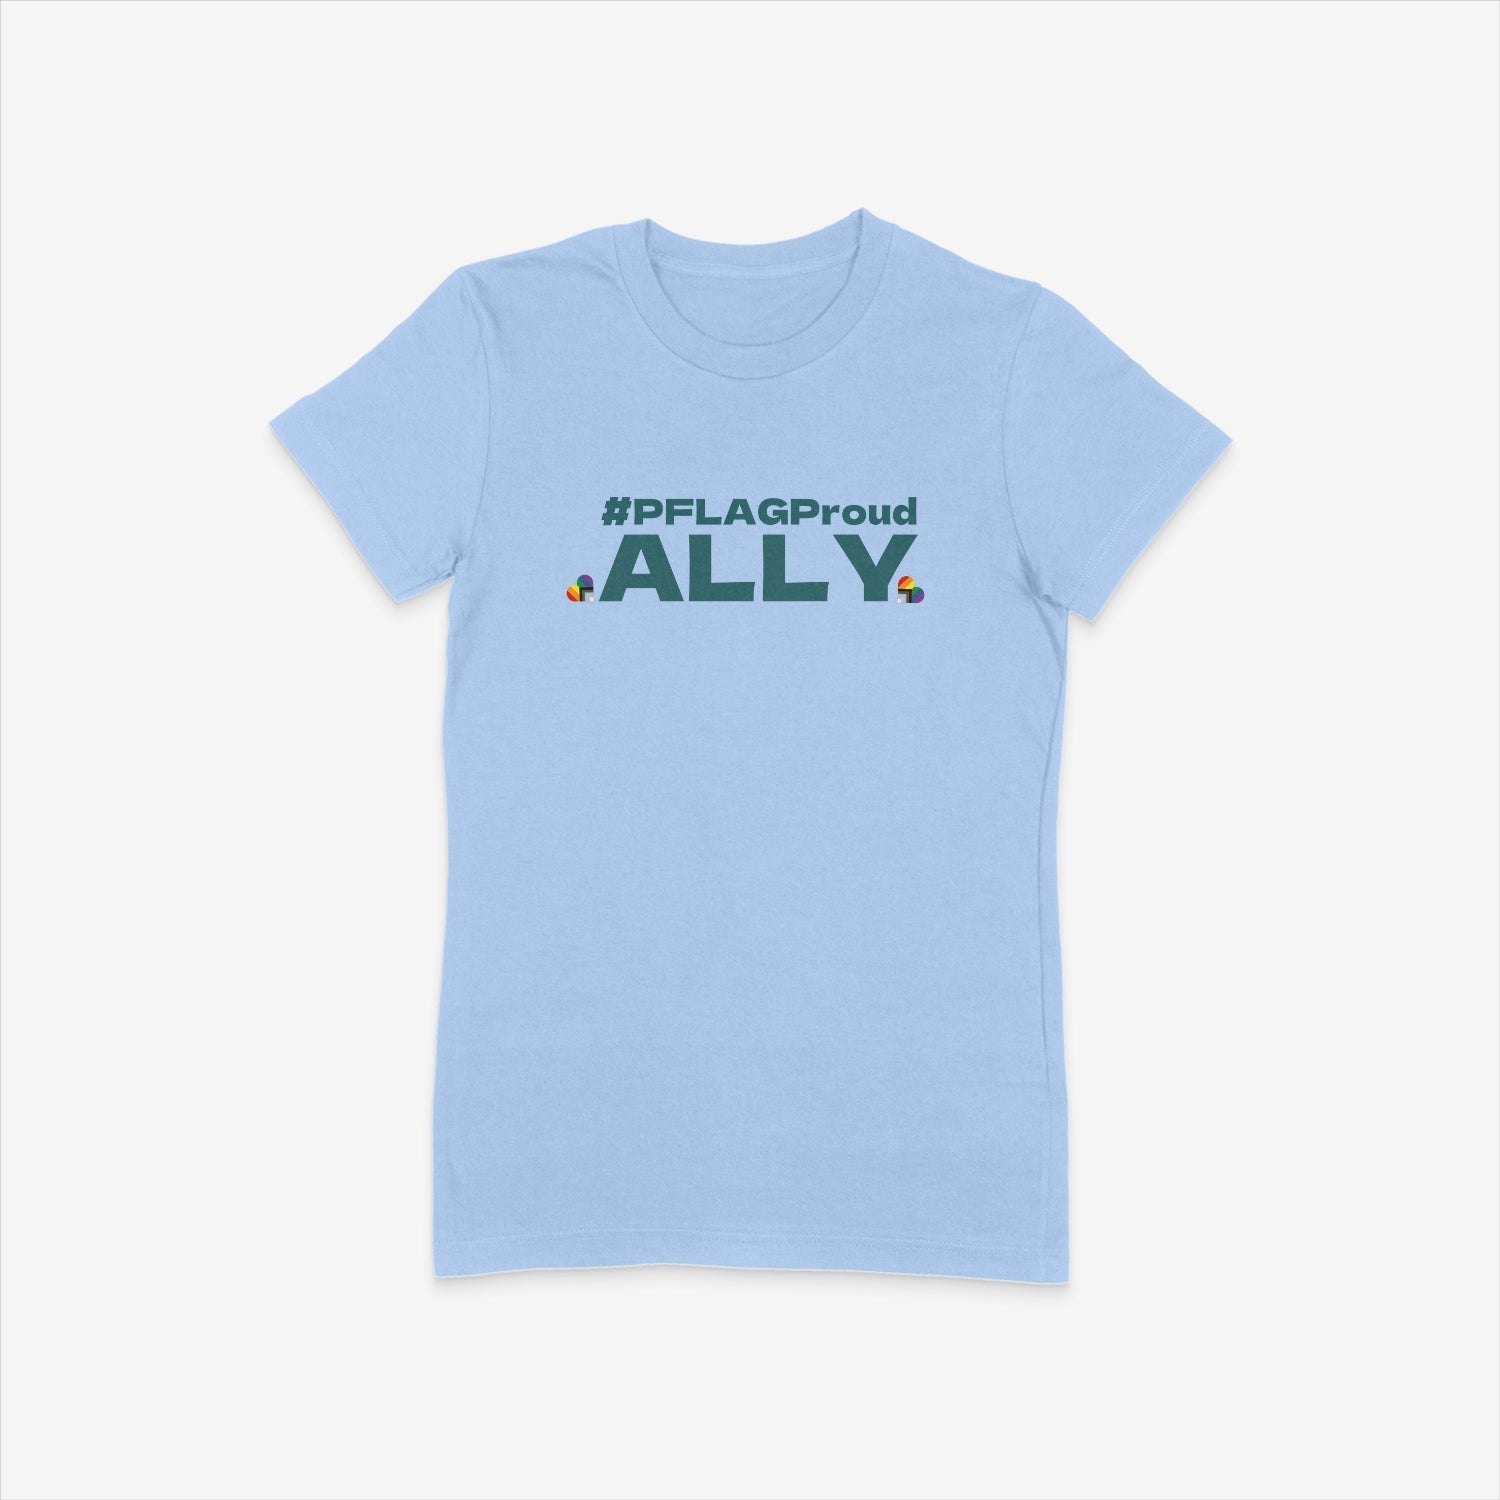 #PFLAGProud Ally - Fitted-Cut Crewneck Short Sleeve T-Shirt